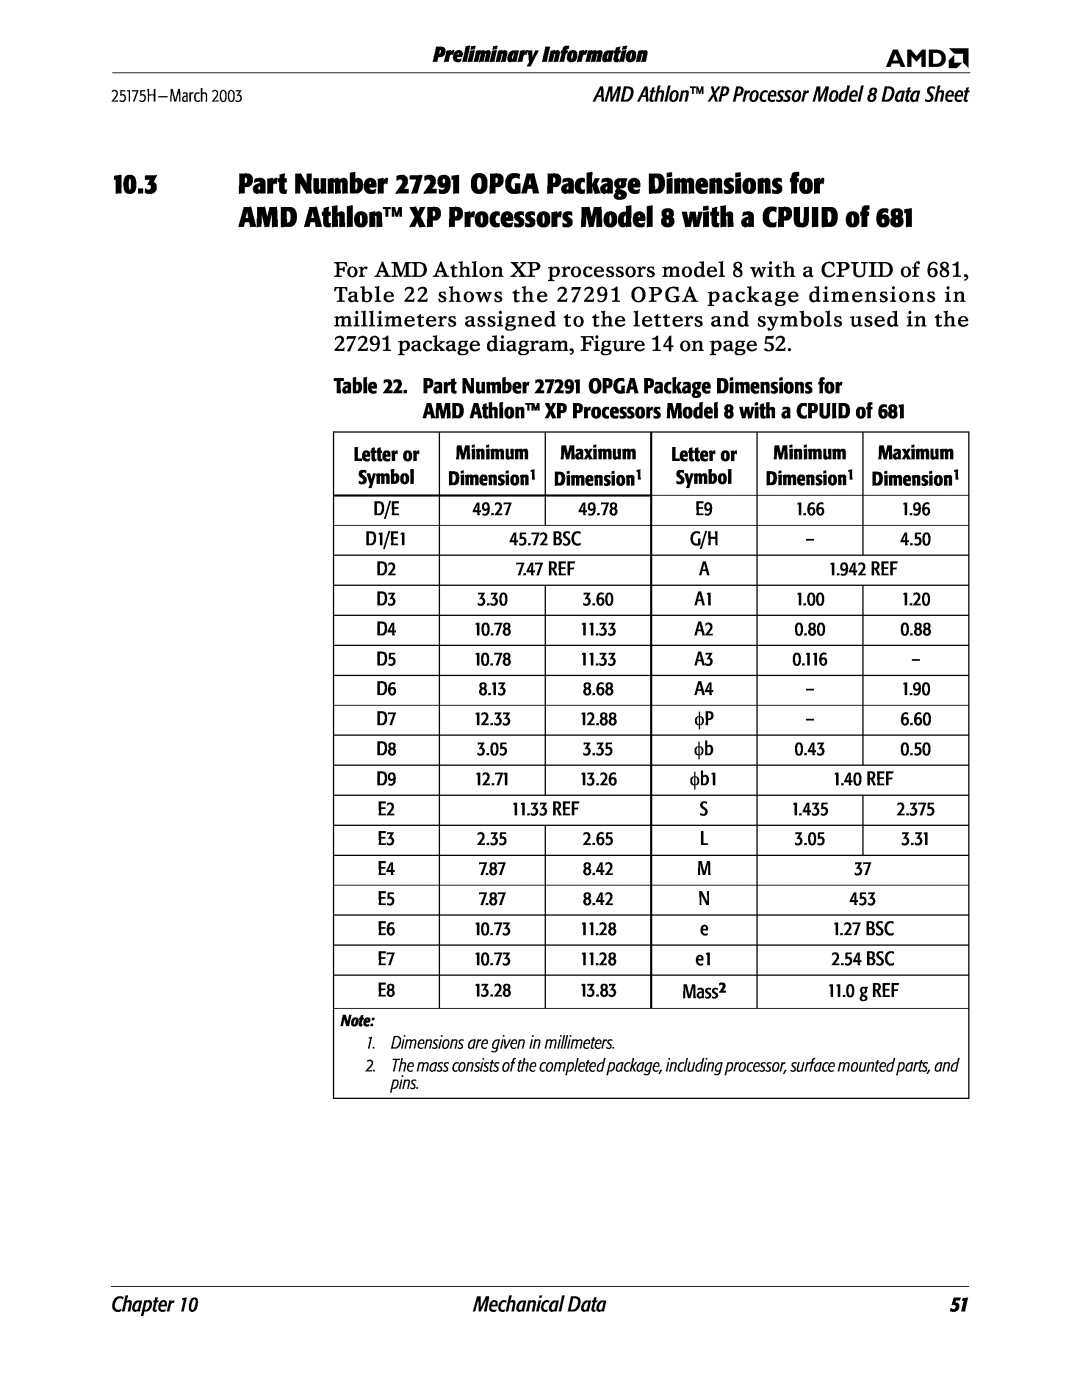 AMD manual Part Number 27291 OPGA Package Dimensions for, AMD Athlon XP Processors Model 8 with a CPUID of, Chapter 